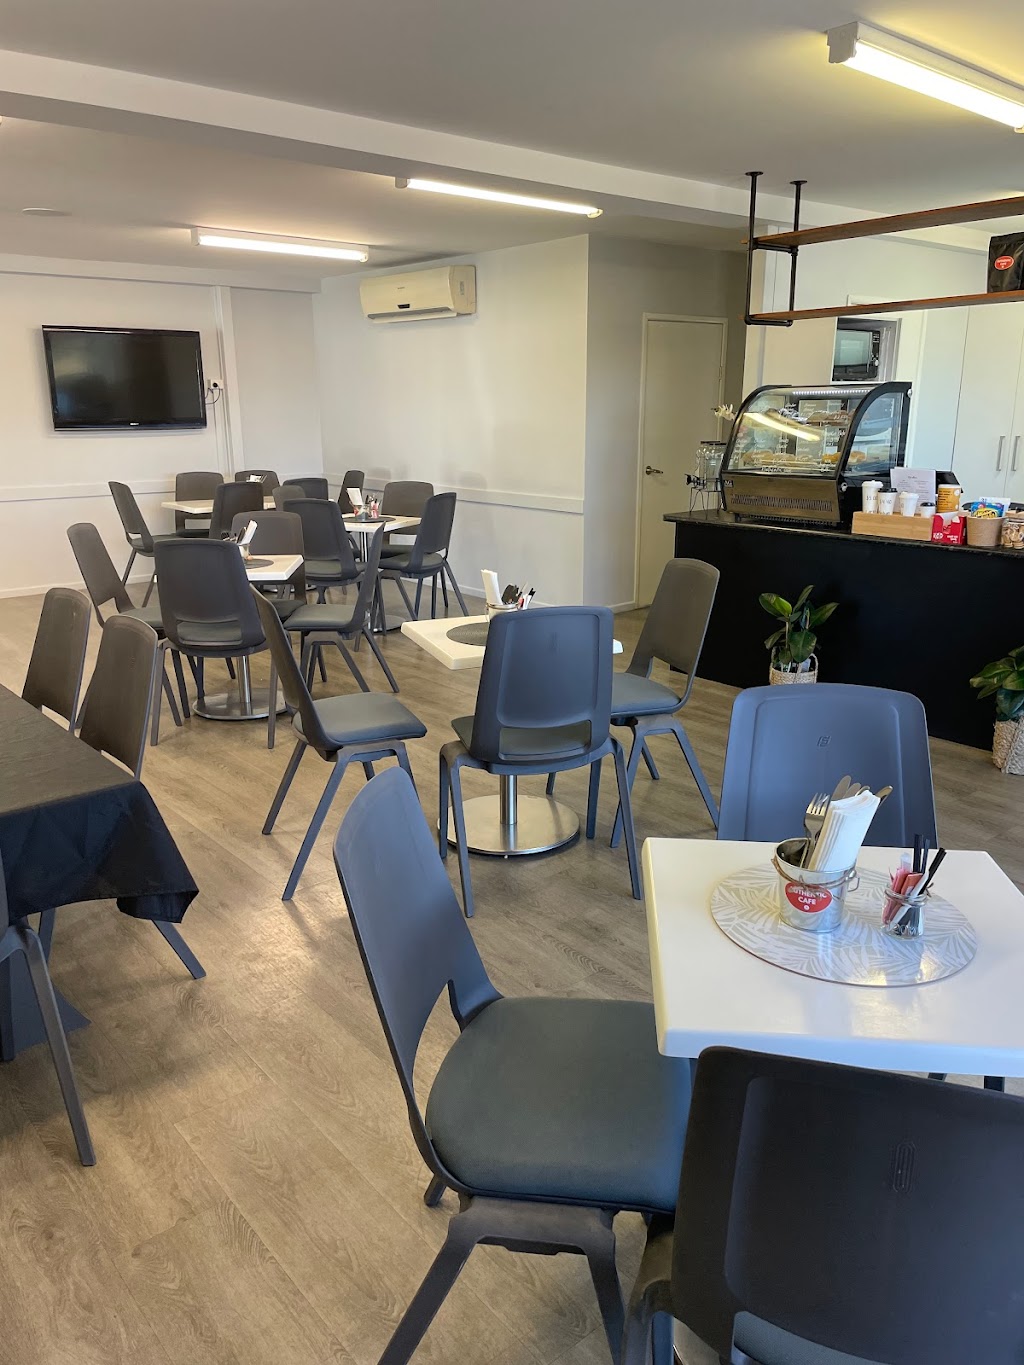 Authentic Cafe | cafe | 350 Loganlea Rd, Meadowbrook QLD 4131, Australia | 0732009464 OR +61 7 3200 9464